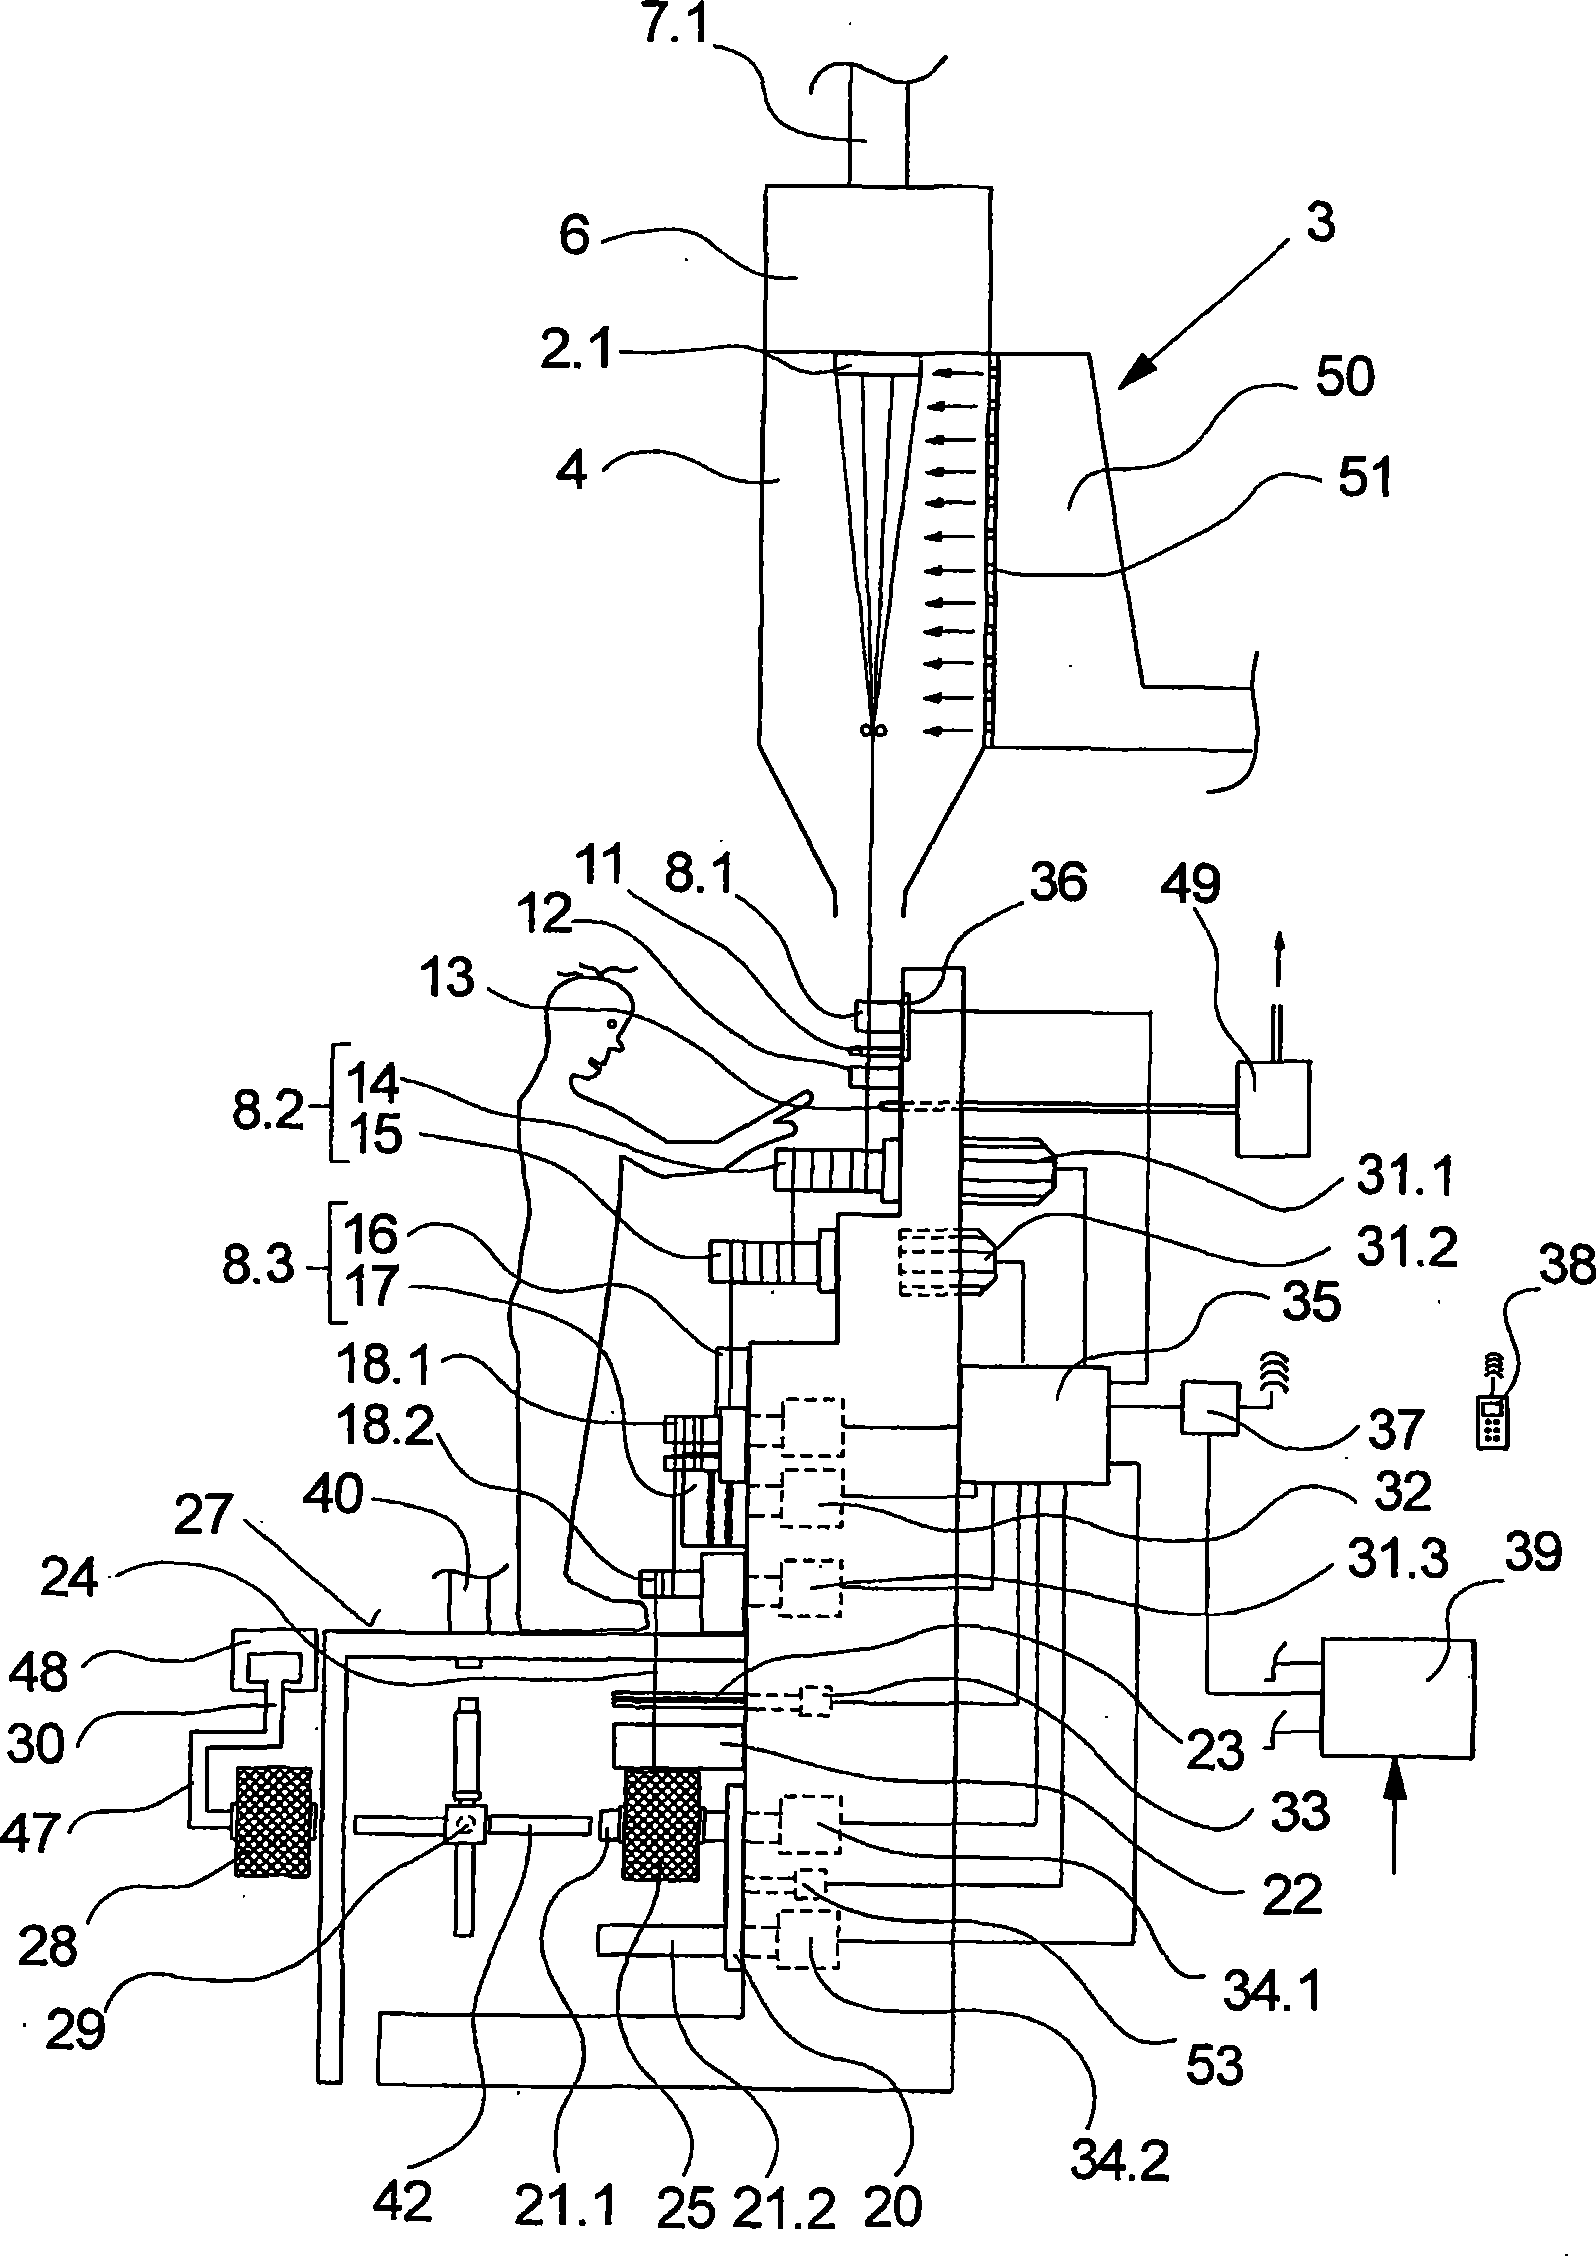 Device for melt spinning, treating and winding synthetic threads